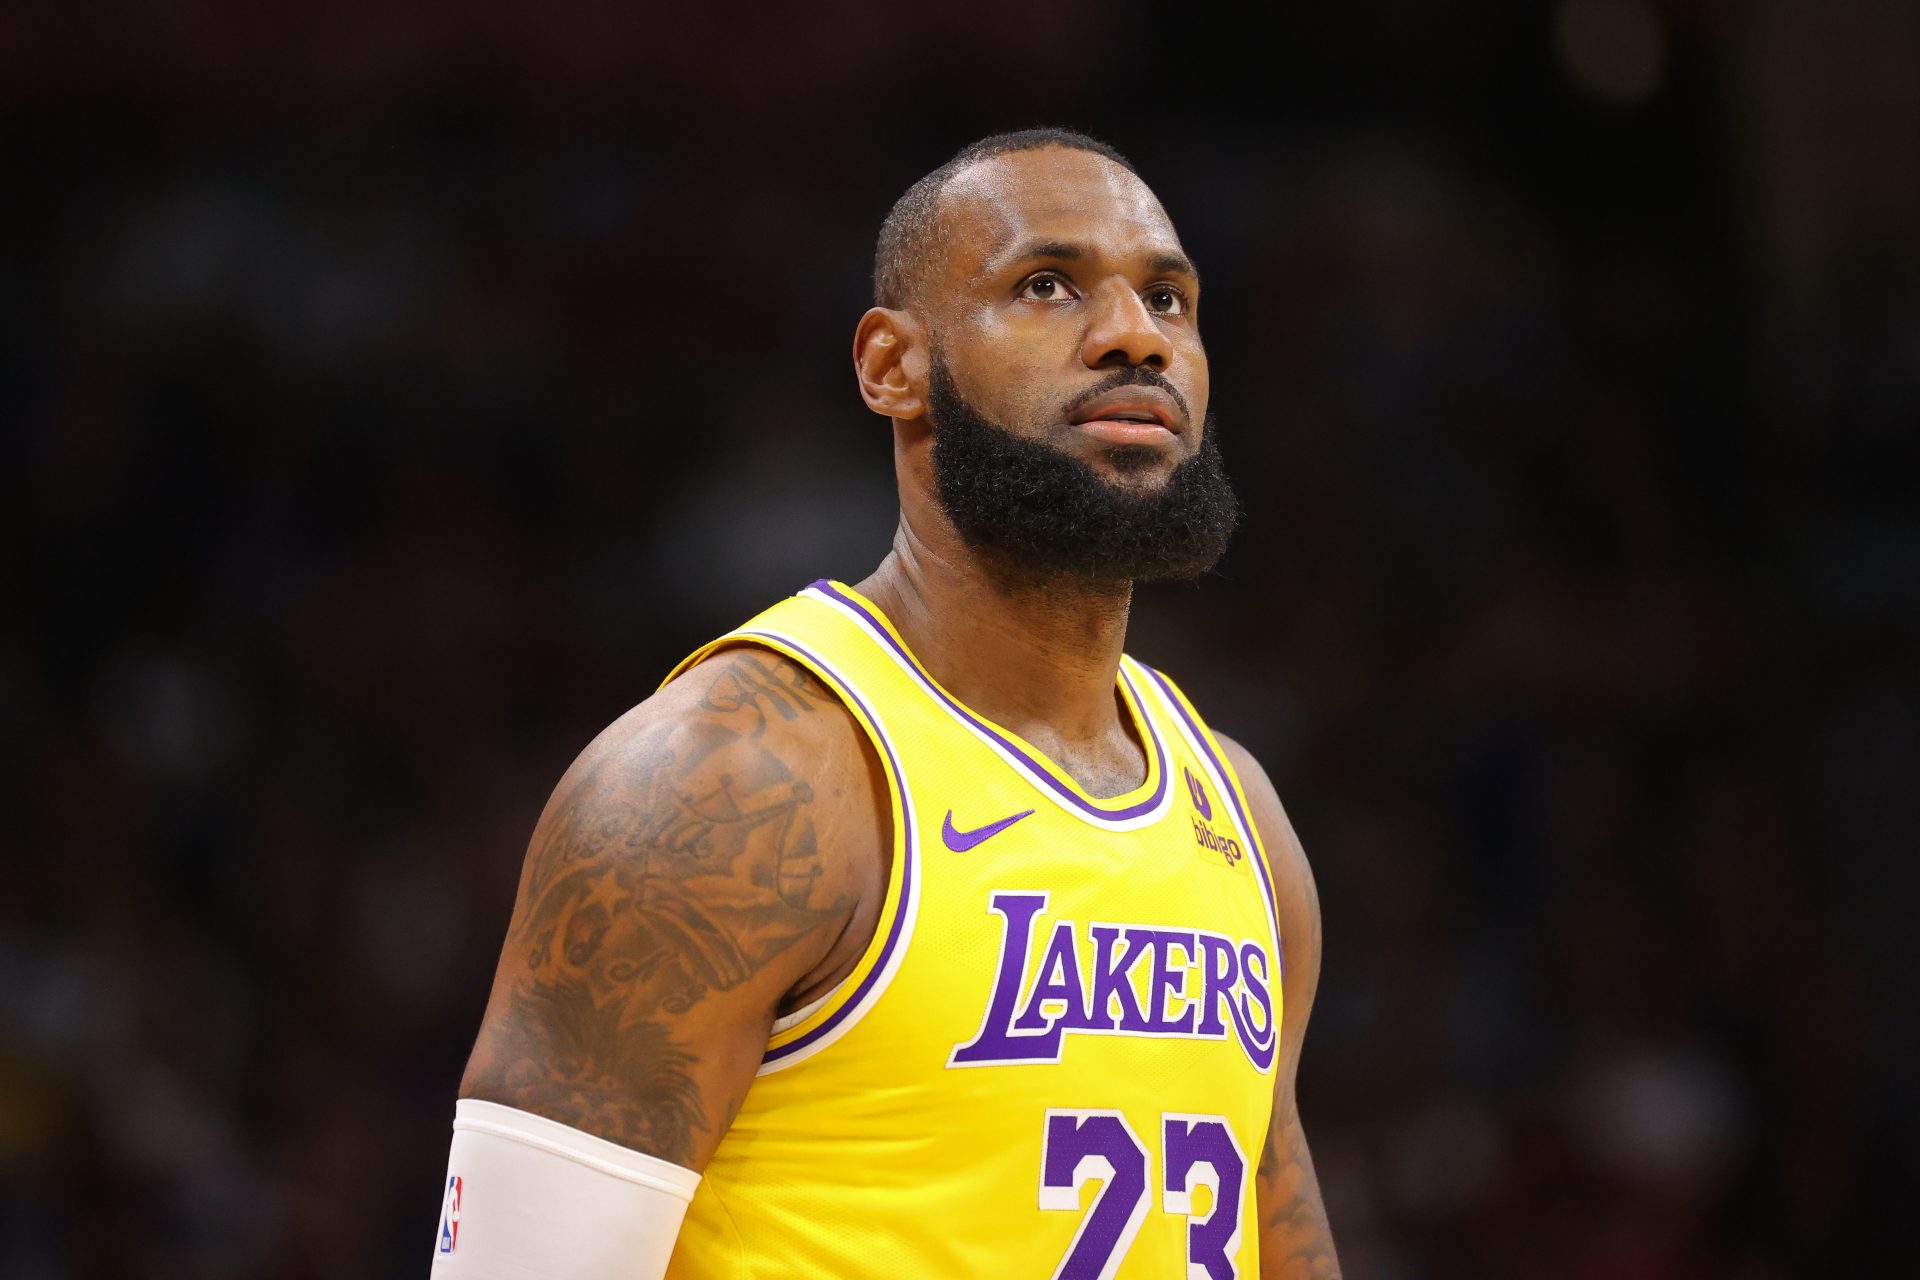 GOAT LeBron James’ four Hall of Fame careers in one almighty NBA journey